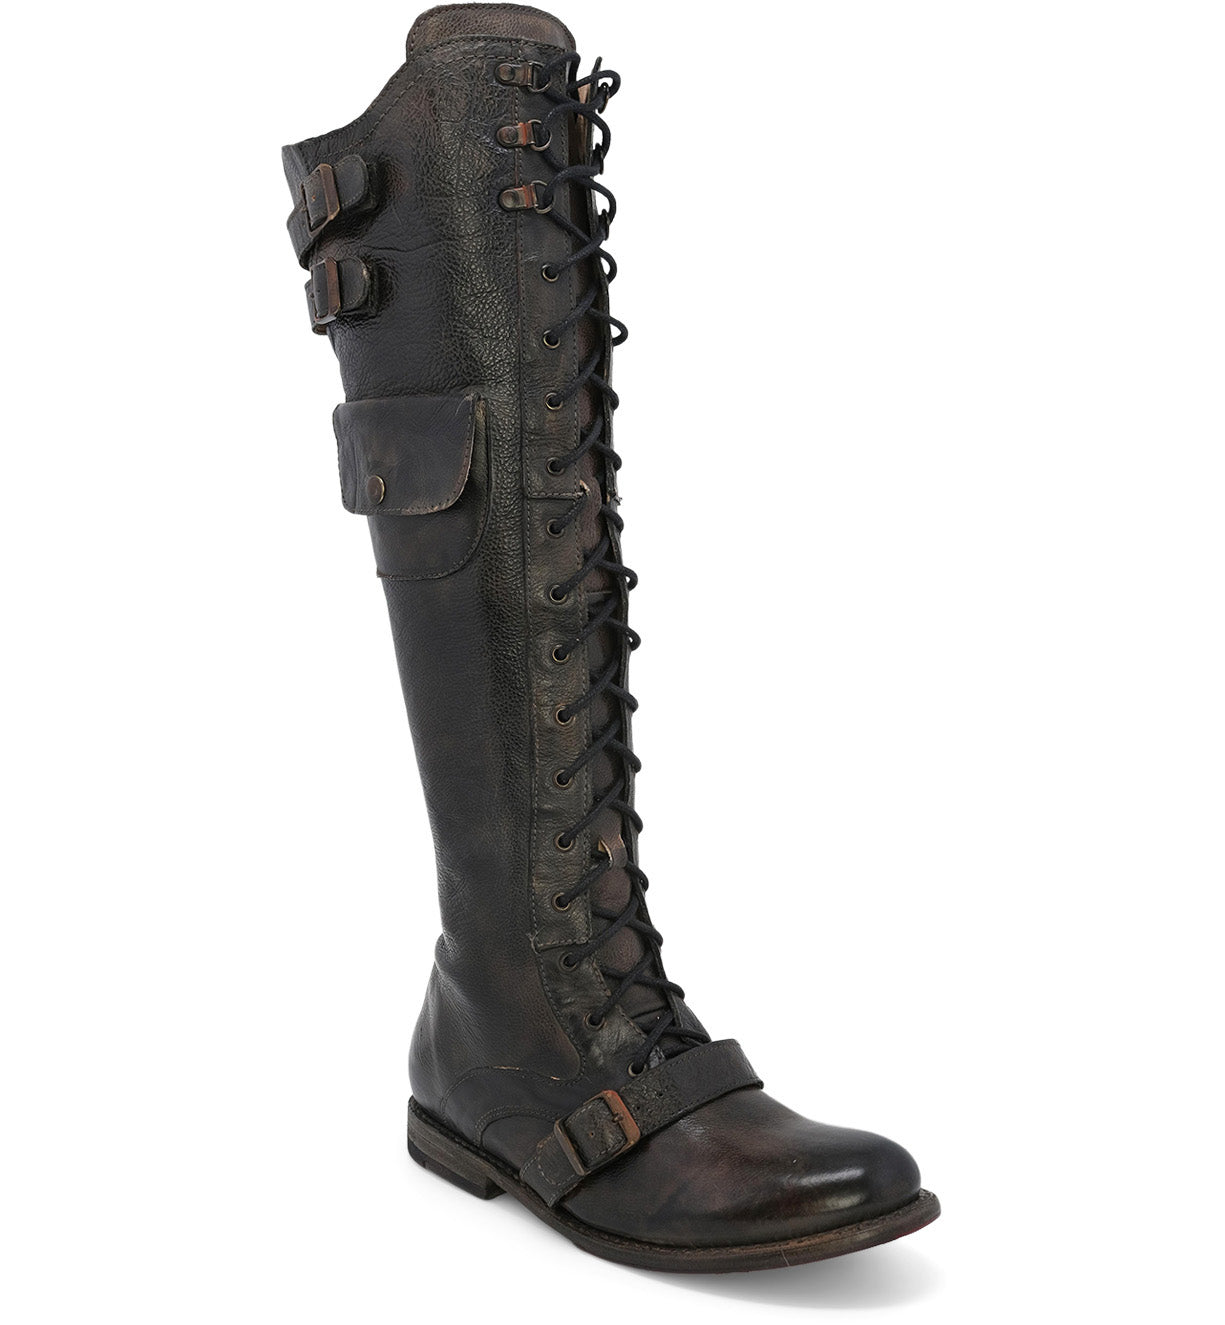 A women's black Meryl boot with buckles, made from vegetable tanned leather and featuring laces, by Oak Tree Farms.